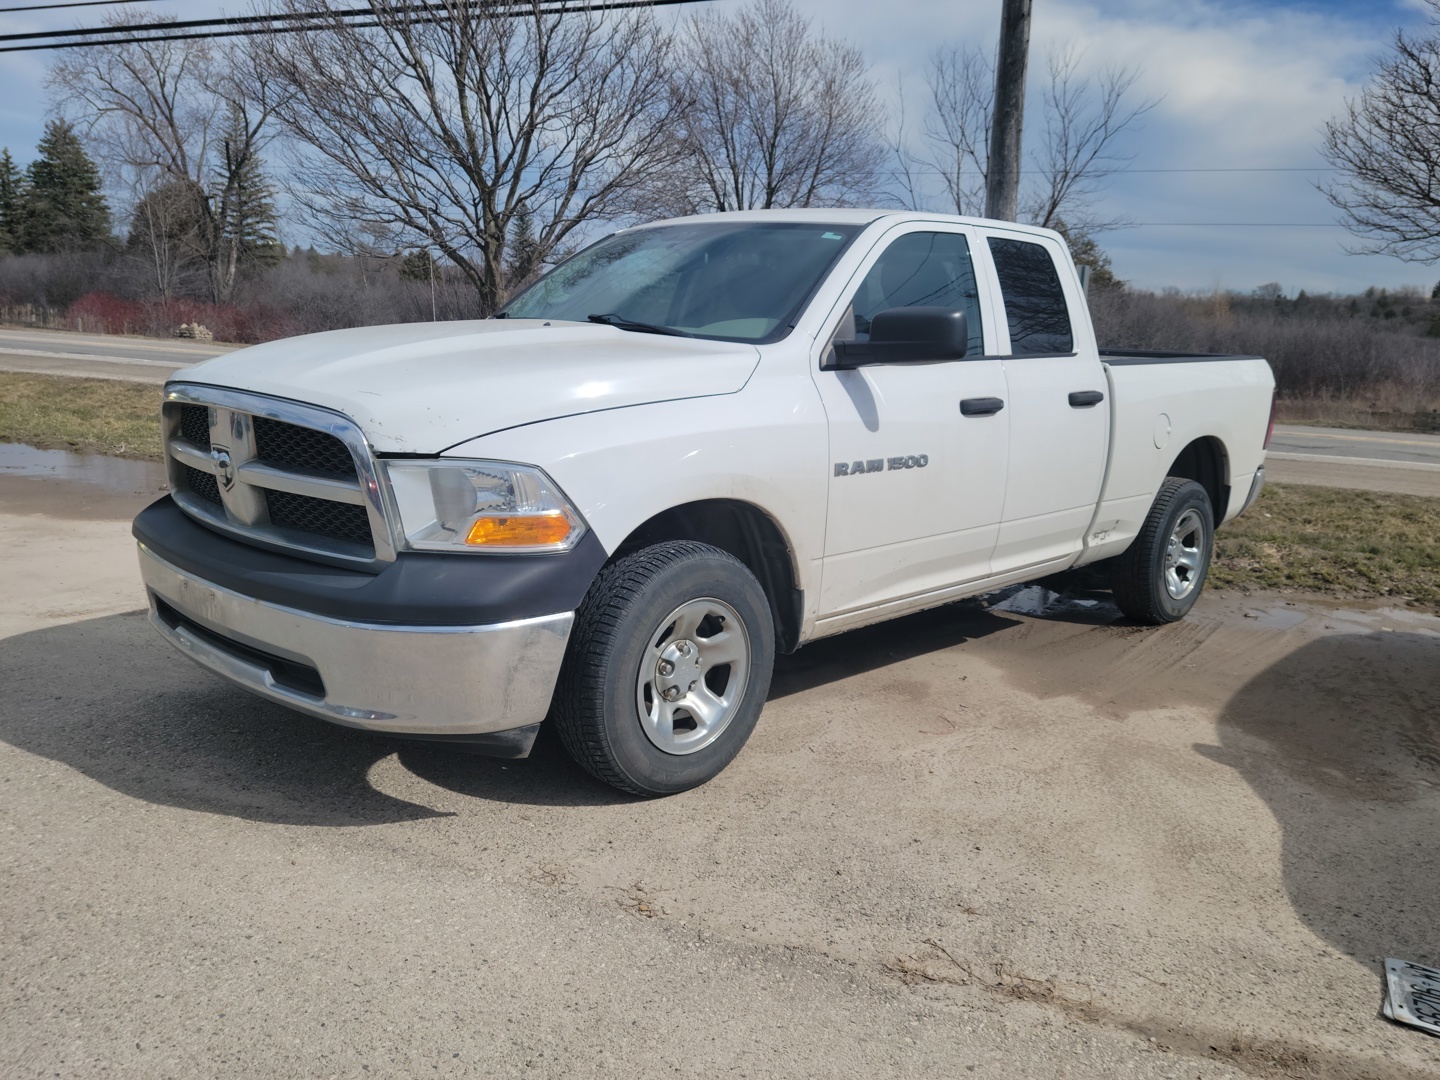 2012 Ram 1500 ST Quad Cab SOLD AS IS – NOT INSPECTED